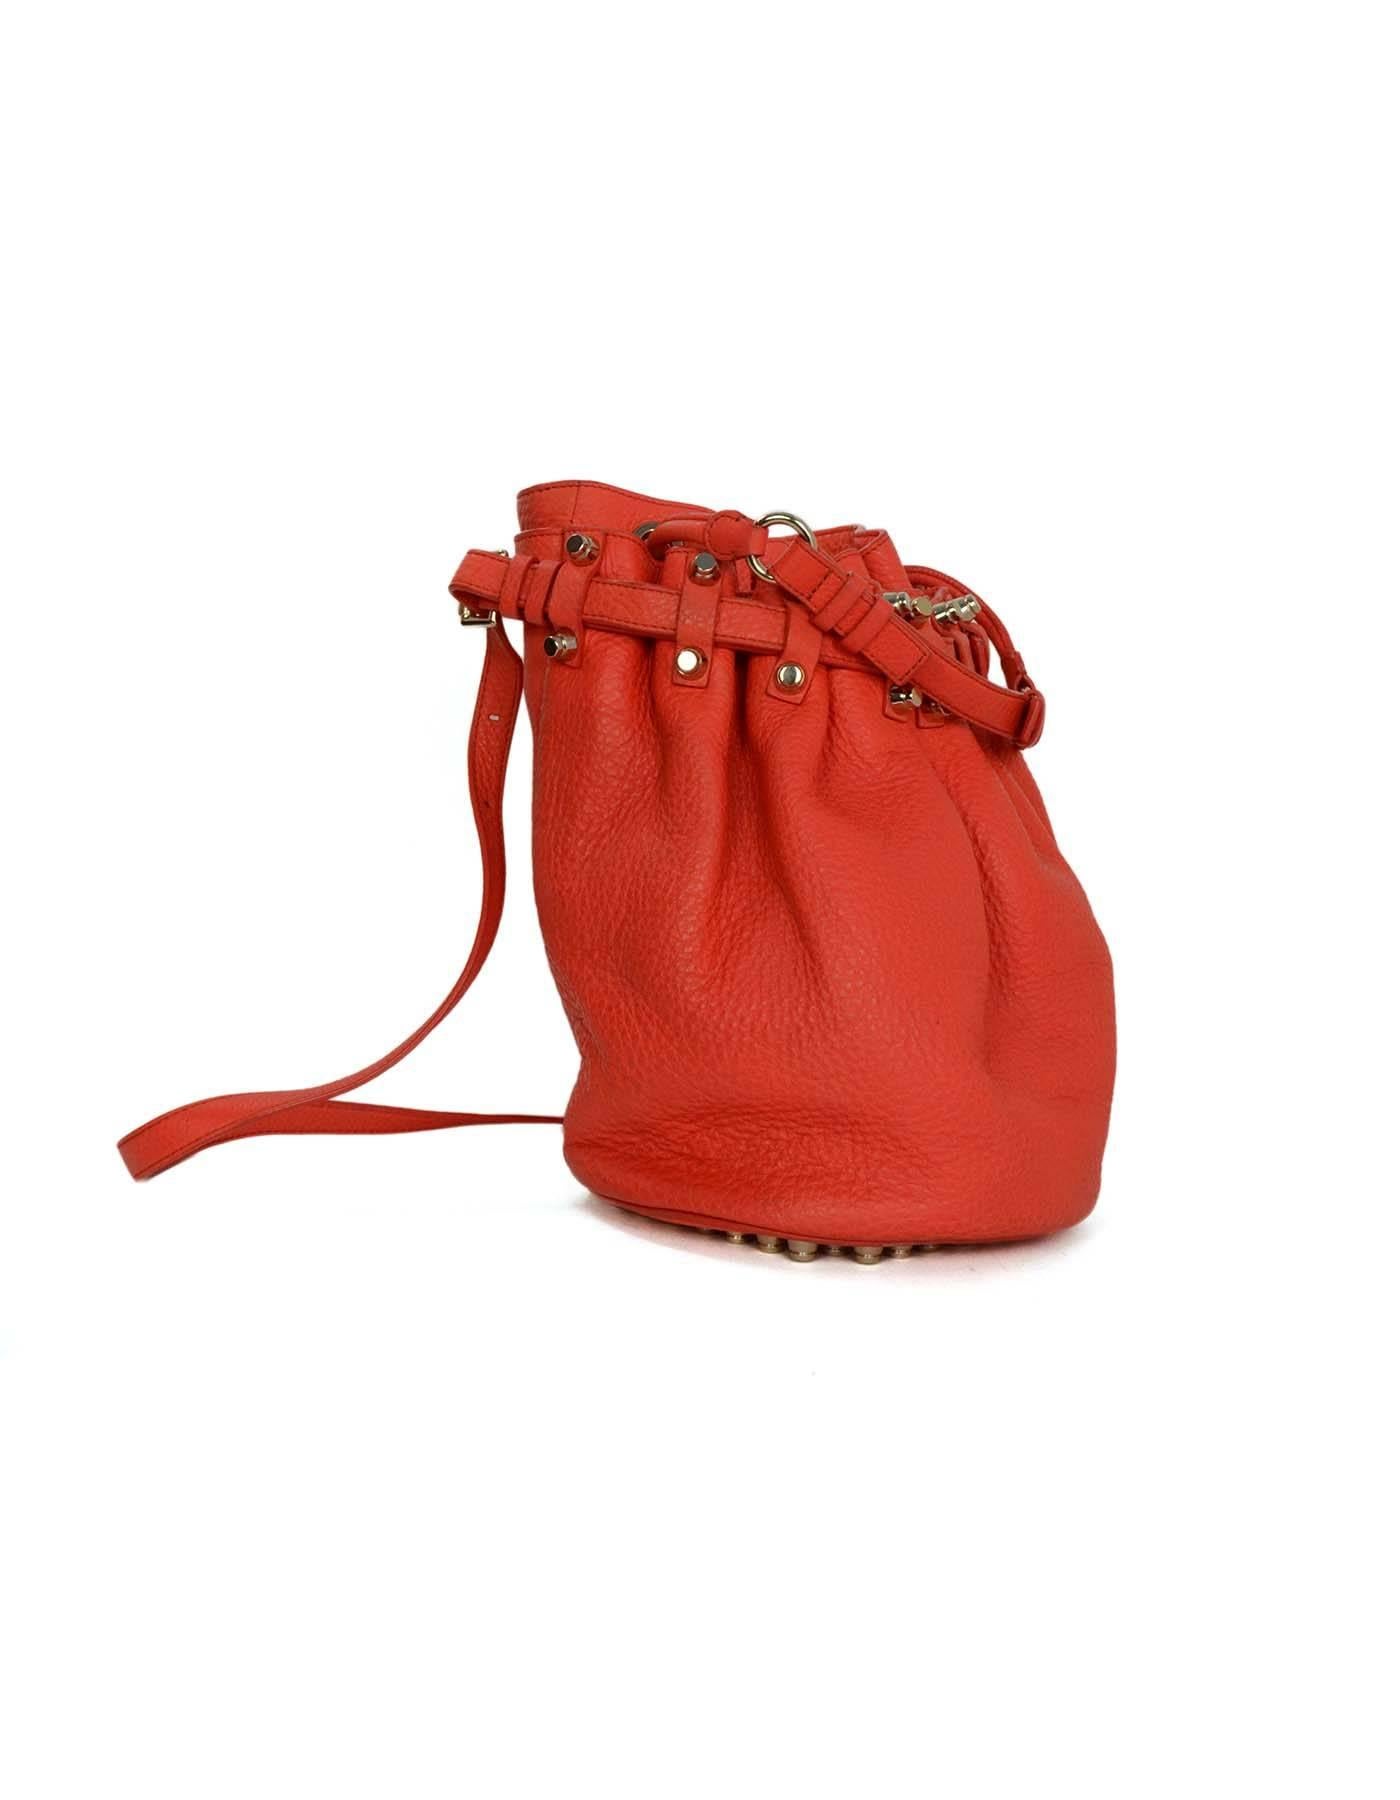 Alexander Wang Red Pebbled Leather Diego Bucket Bag 
Features optional shoulder/crossbody strap
Made In: China
Color: Red
Hardware: Silvertone
Materials: Pebbled leather
Lining: Black nylon-blend textile
Closure/Opening: Drawstring style